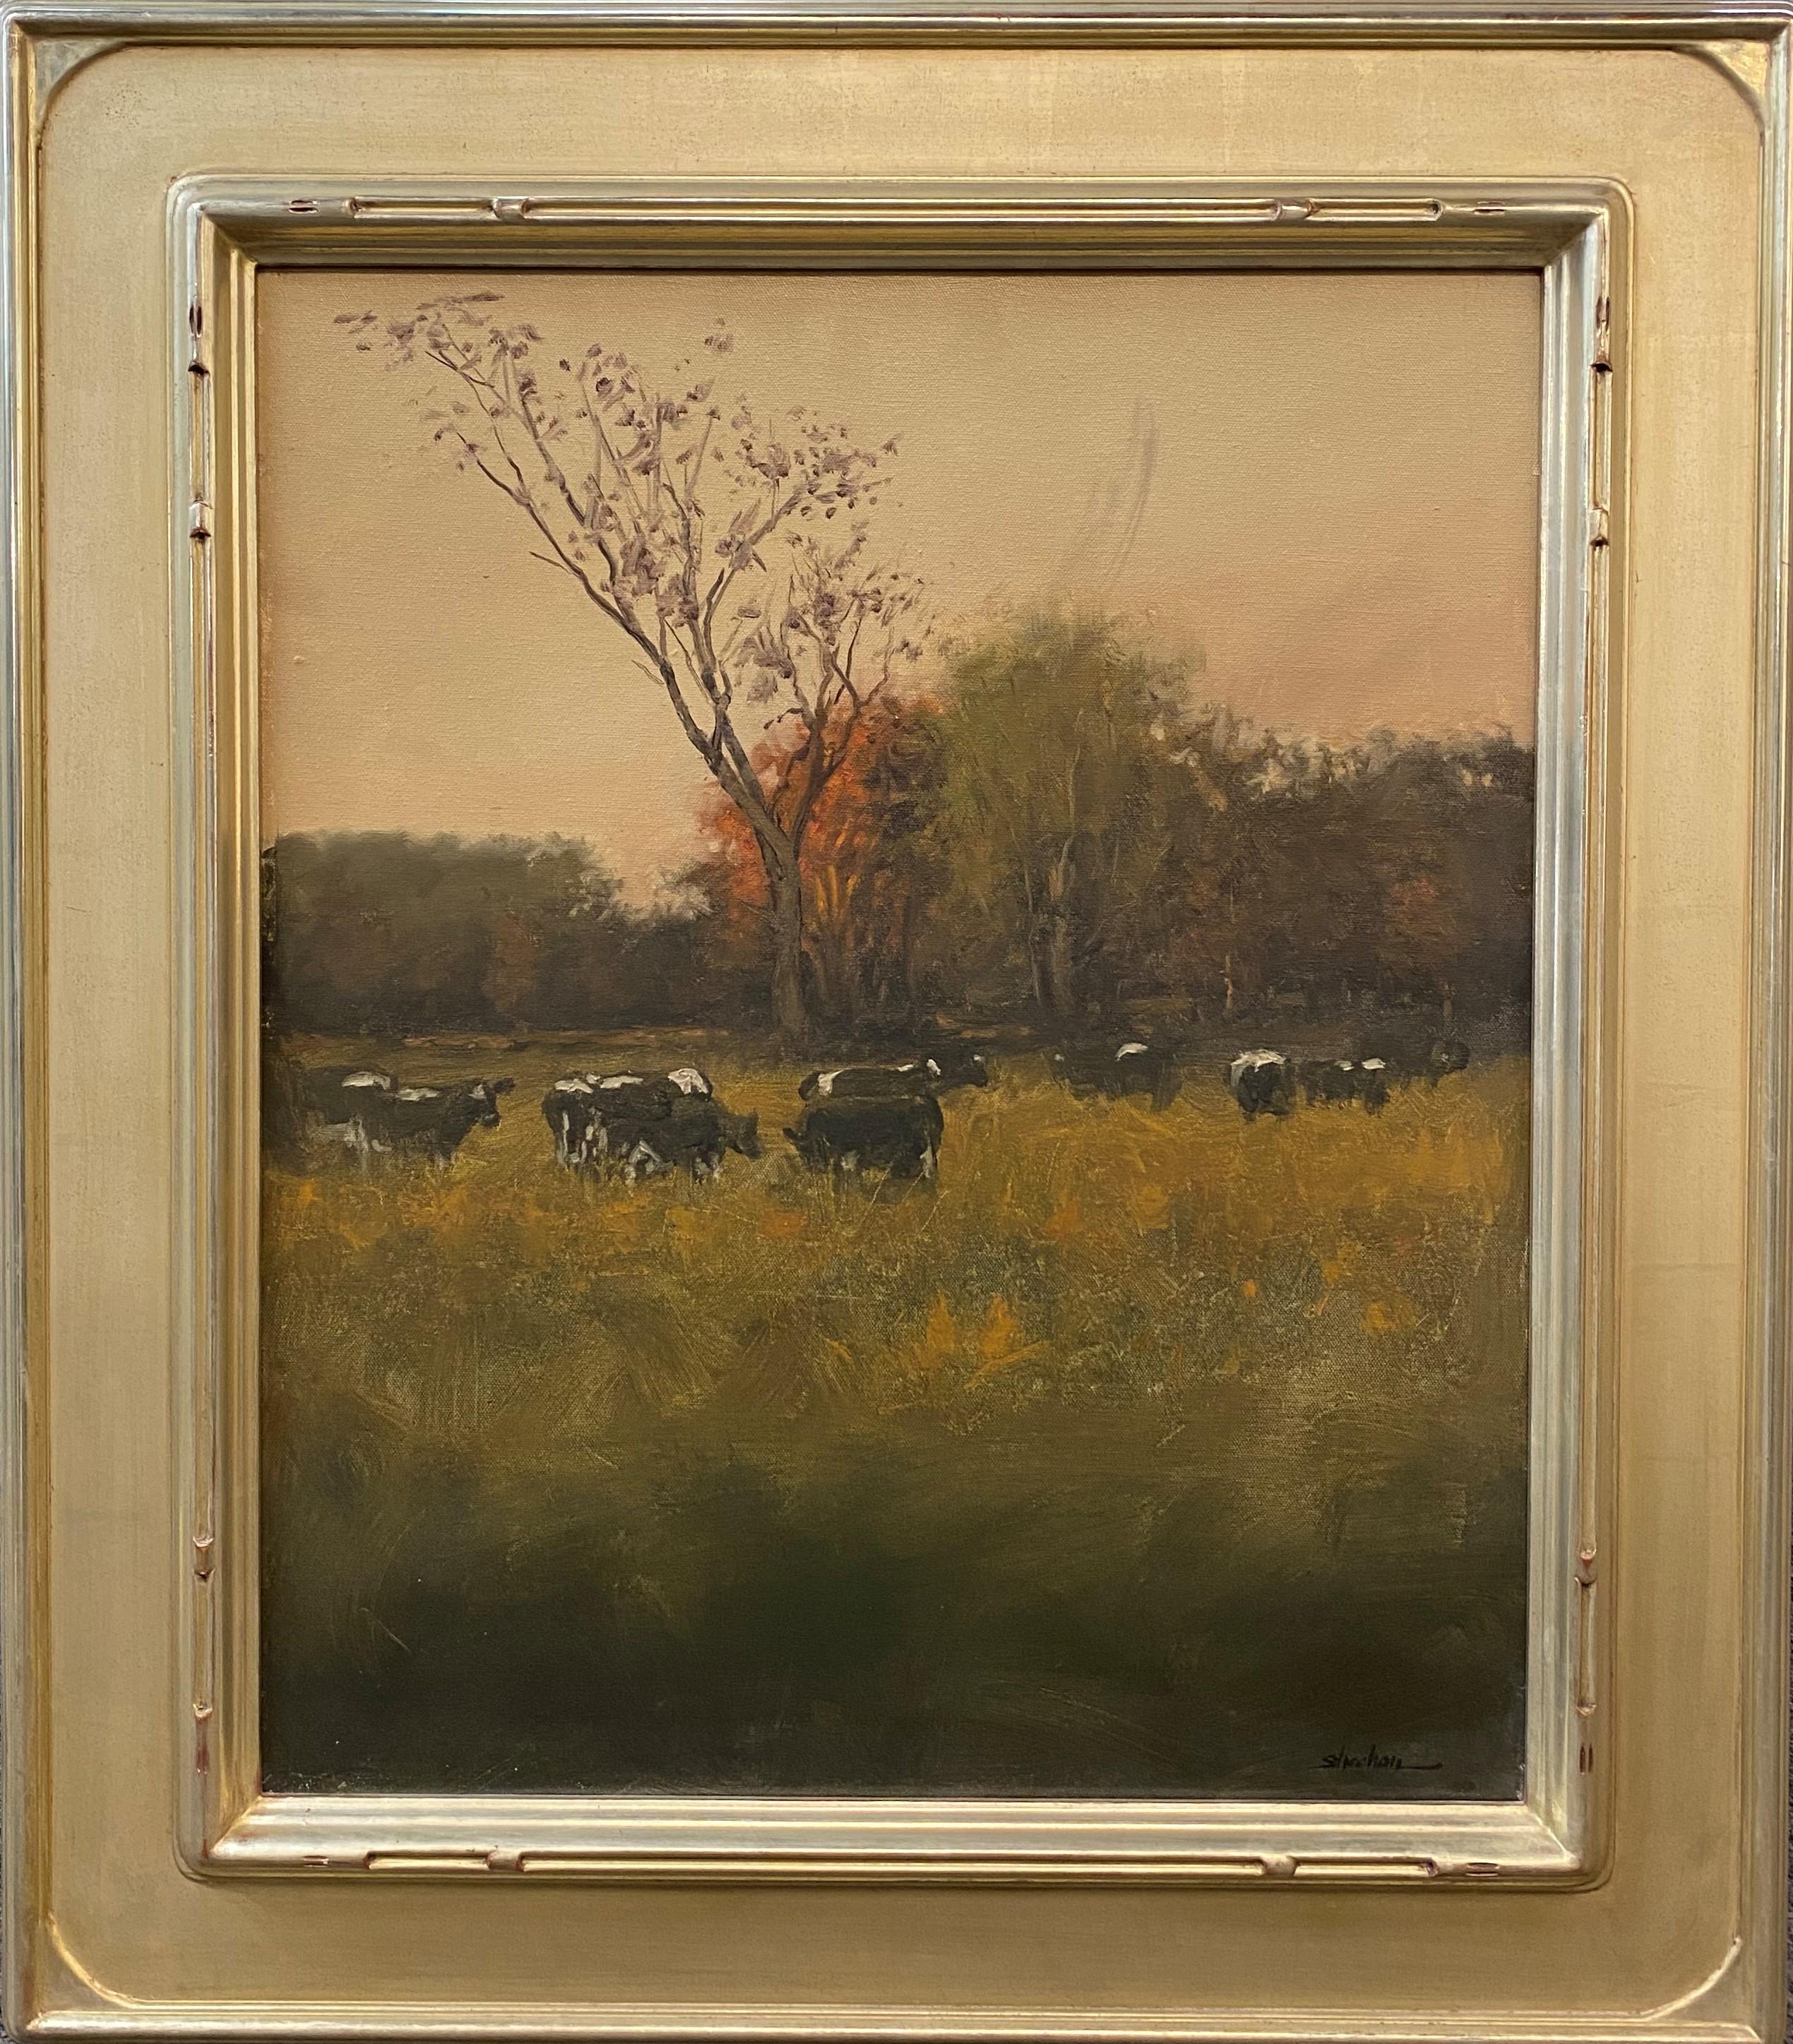 Autumn Landscape with Cows - Art by Dennis Sheehan